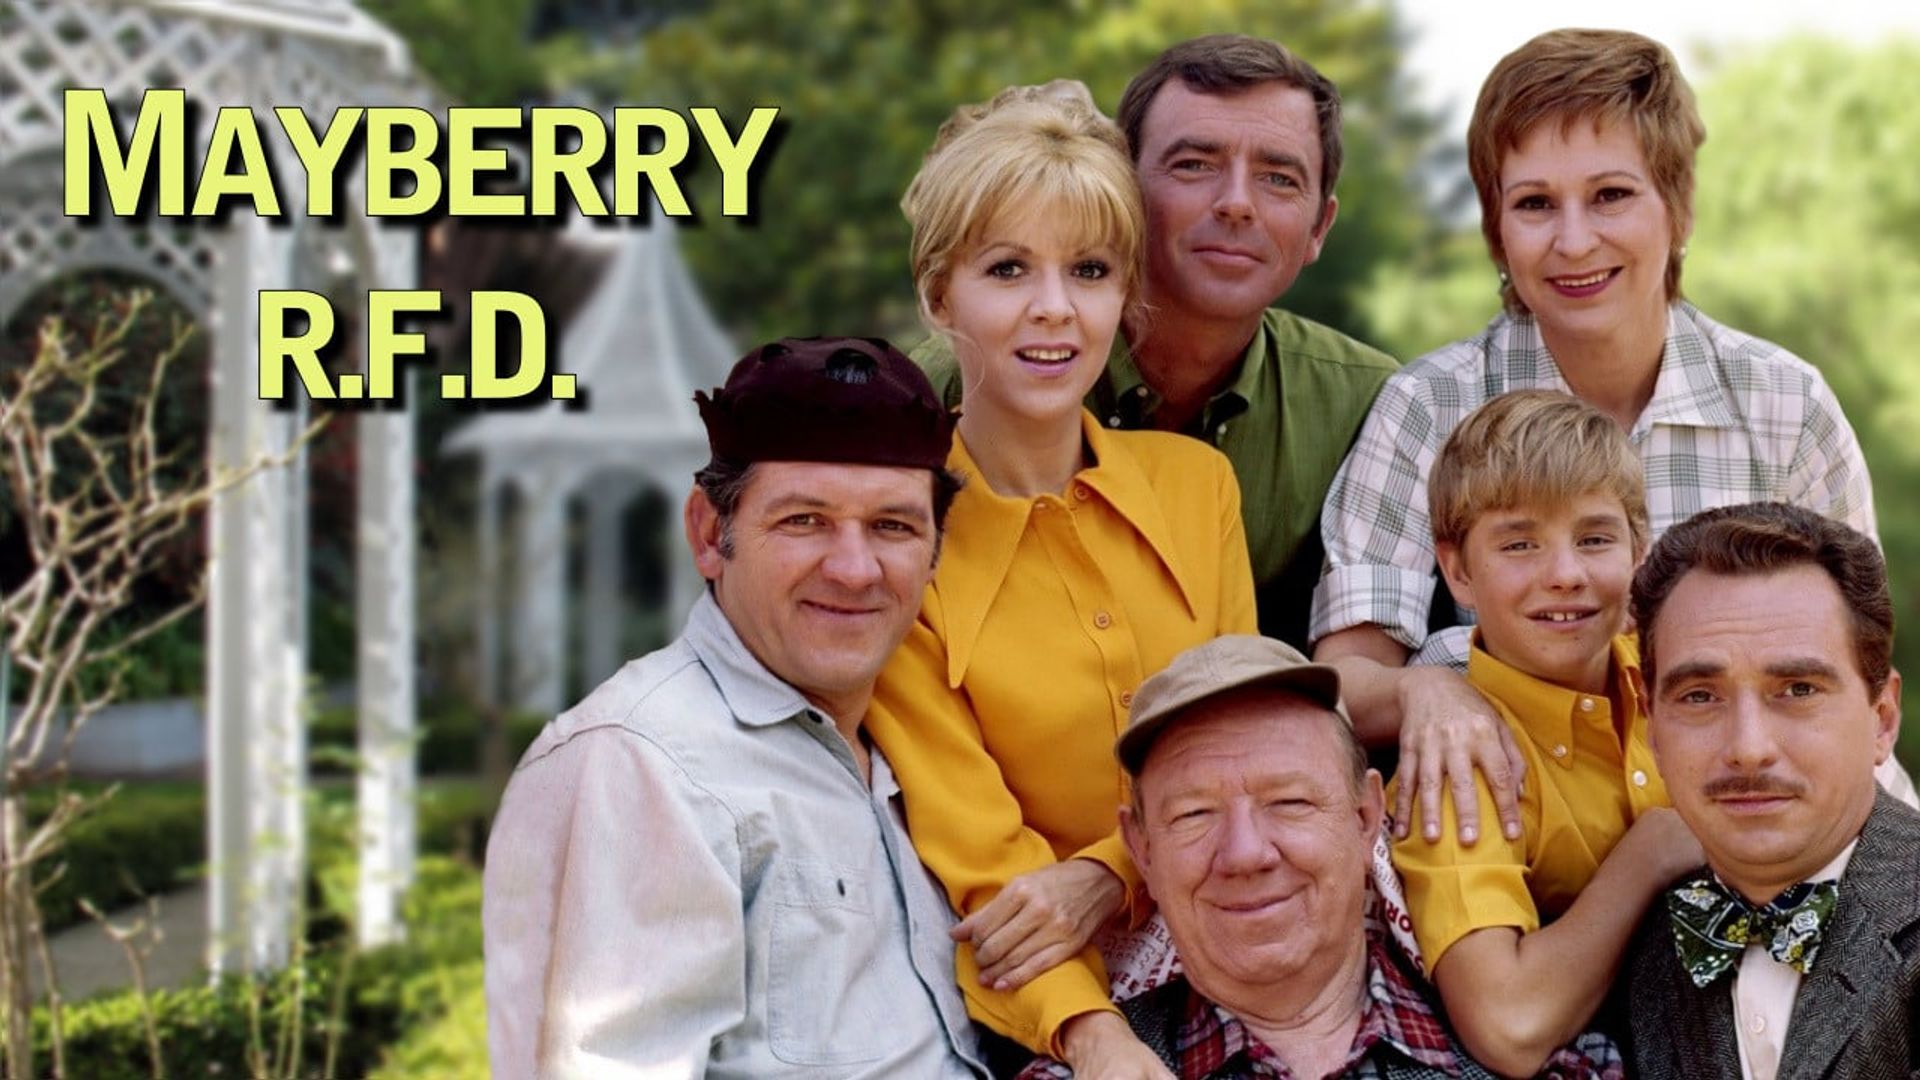 Mayberry R.F.D. background